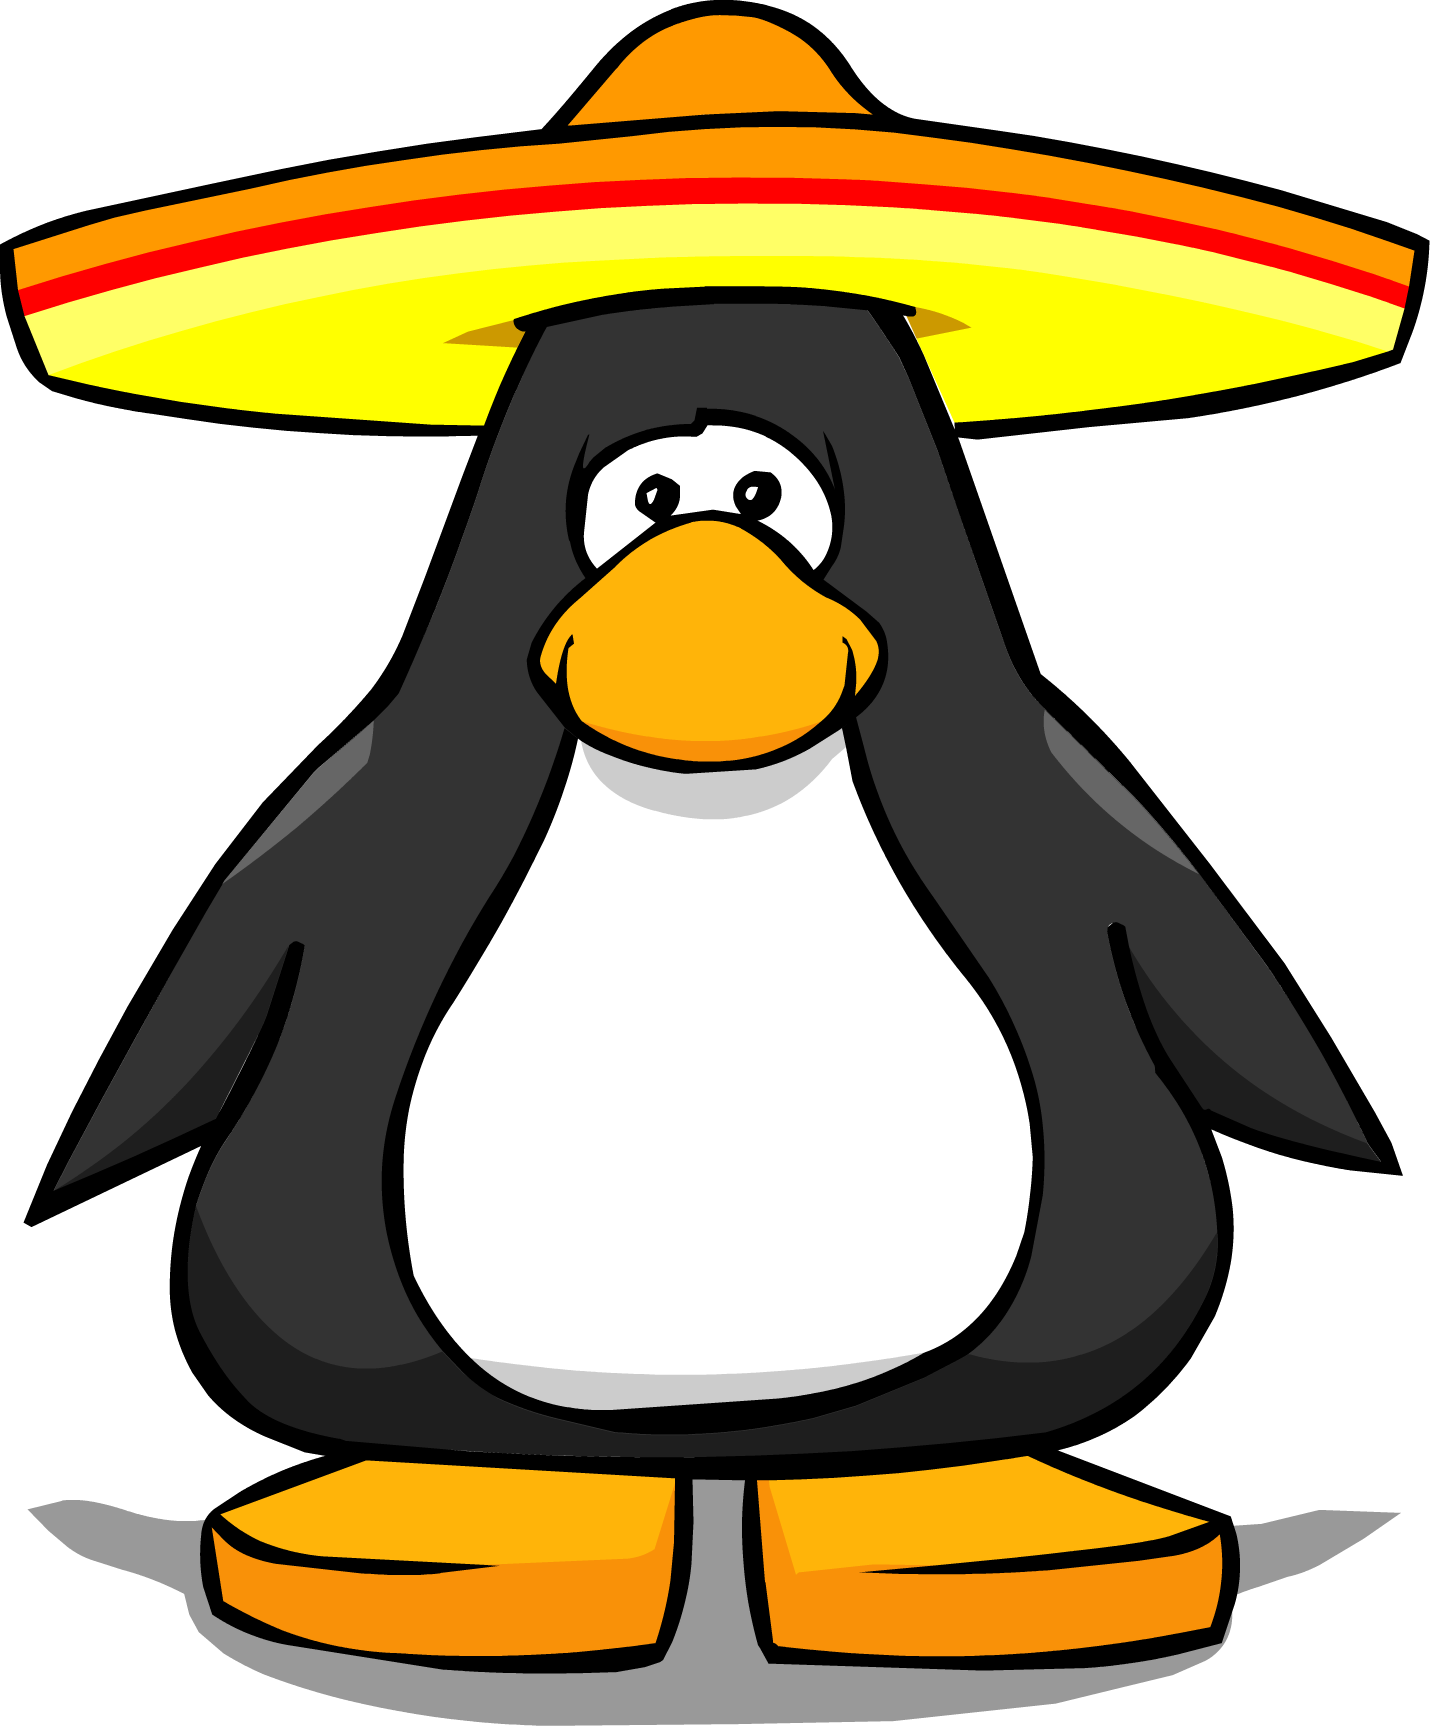 Pictures Of A Sombrero - Club Penguin Tour Guide Hat (1430x1726)